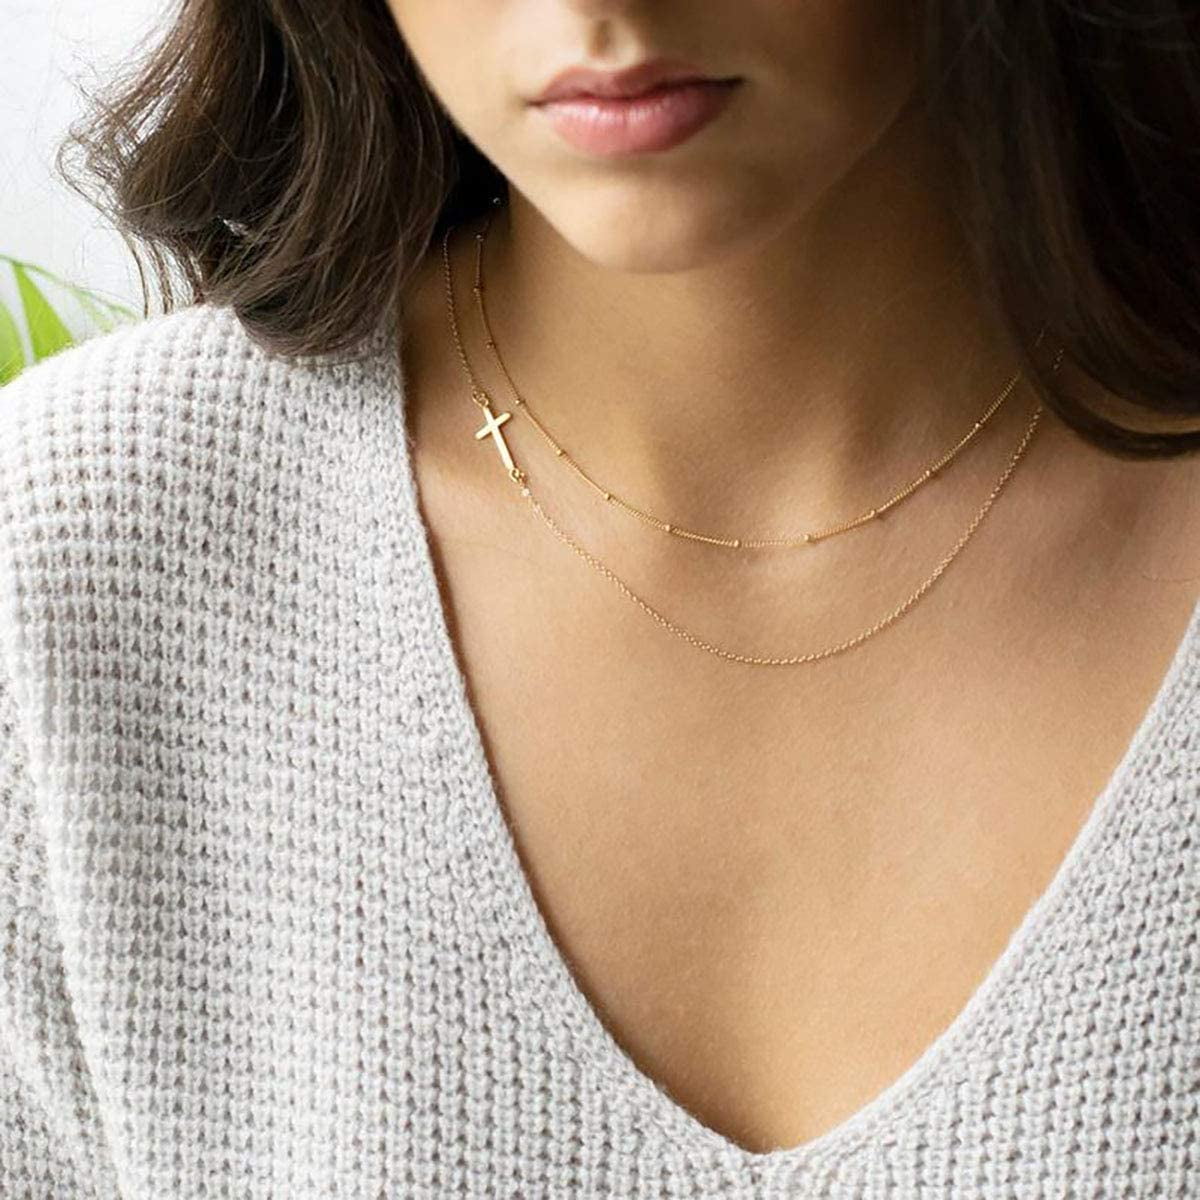 Dainty Rose Gold Choker 14K goldfilled Necklace and 6mm Ball Charm Minimalist 